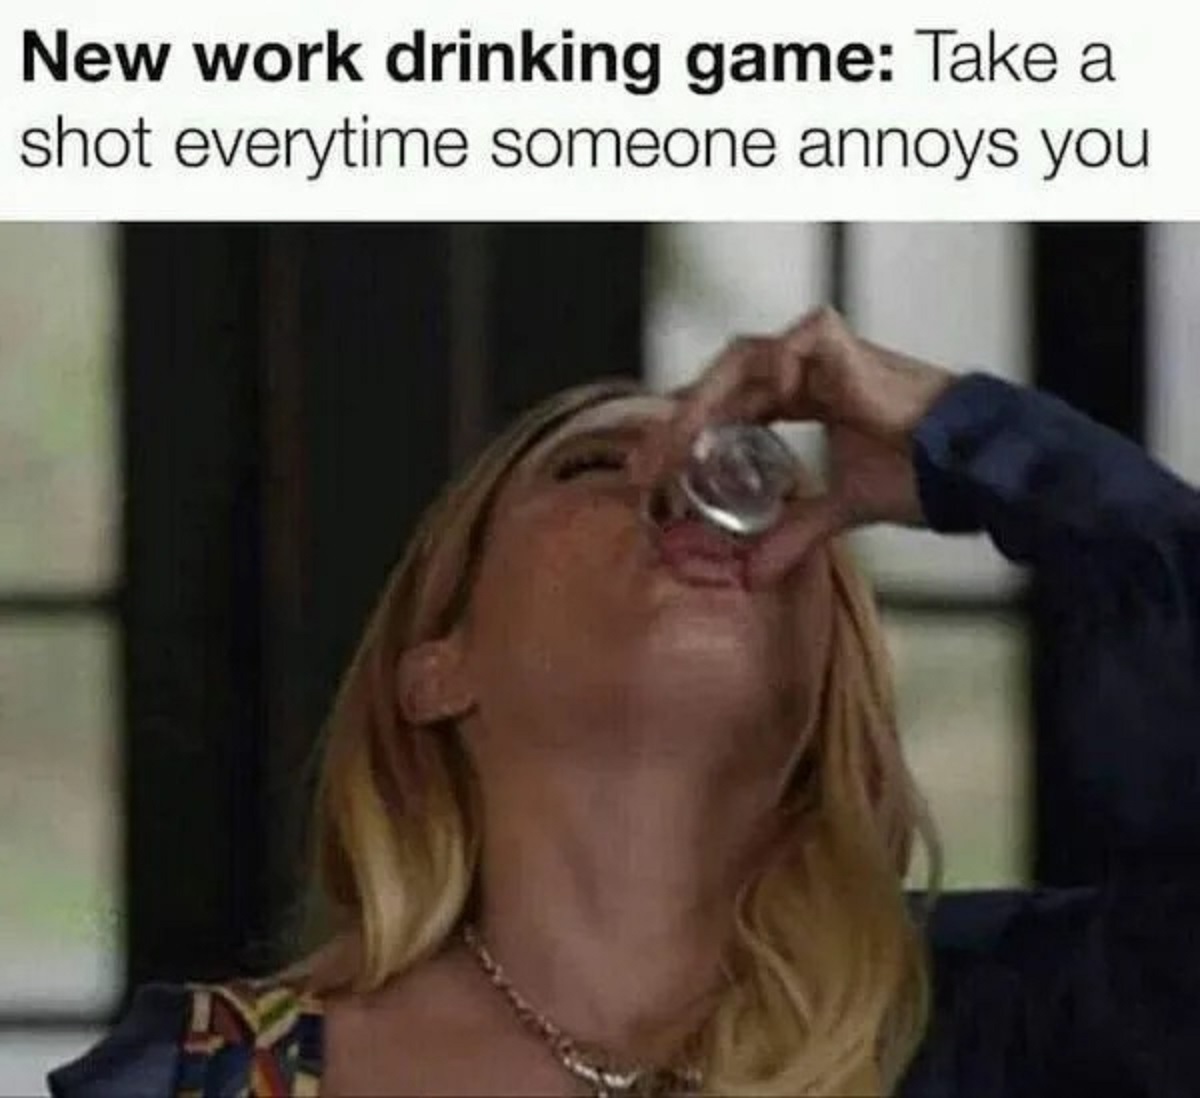 alcohol shots meme - New work drinking game Take a shot everytime someone annoys you